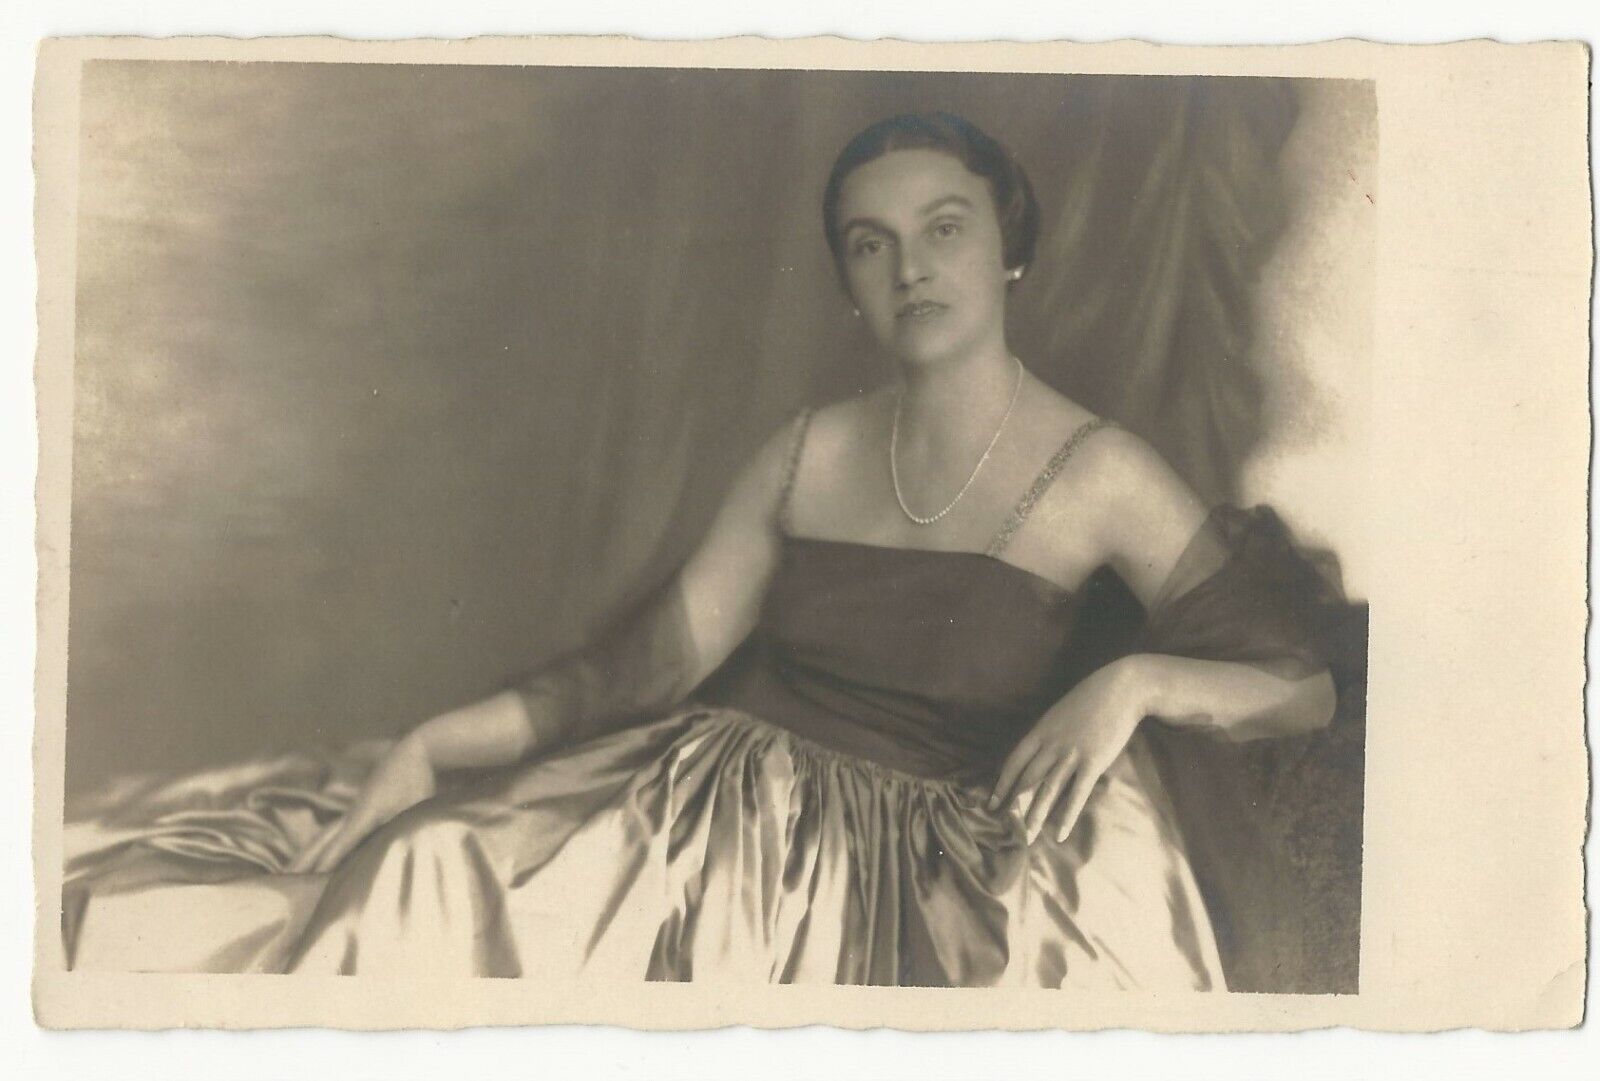 SOPHISTICATED LADY : LOVELY POSE  (RPPC)